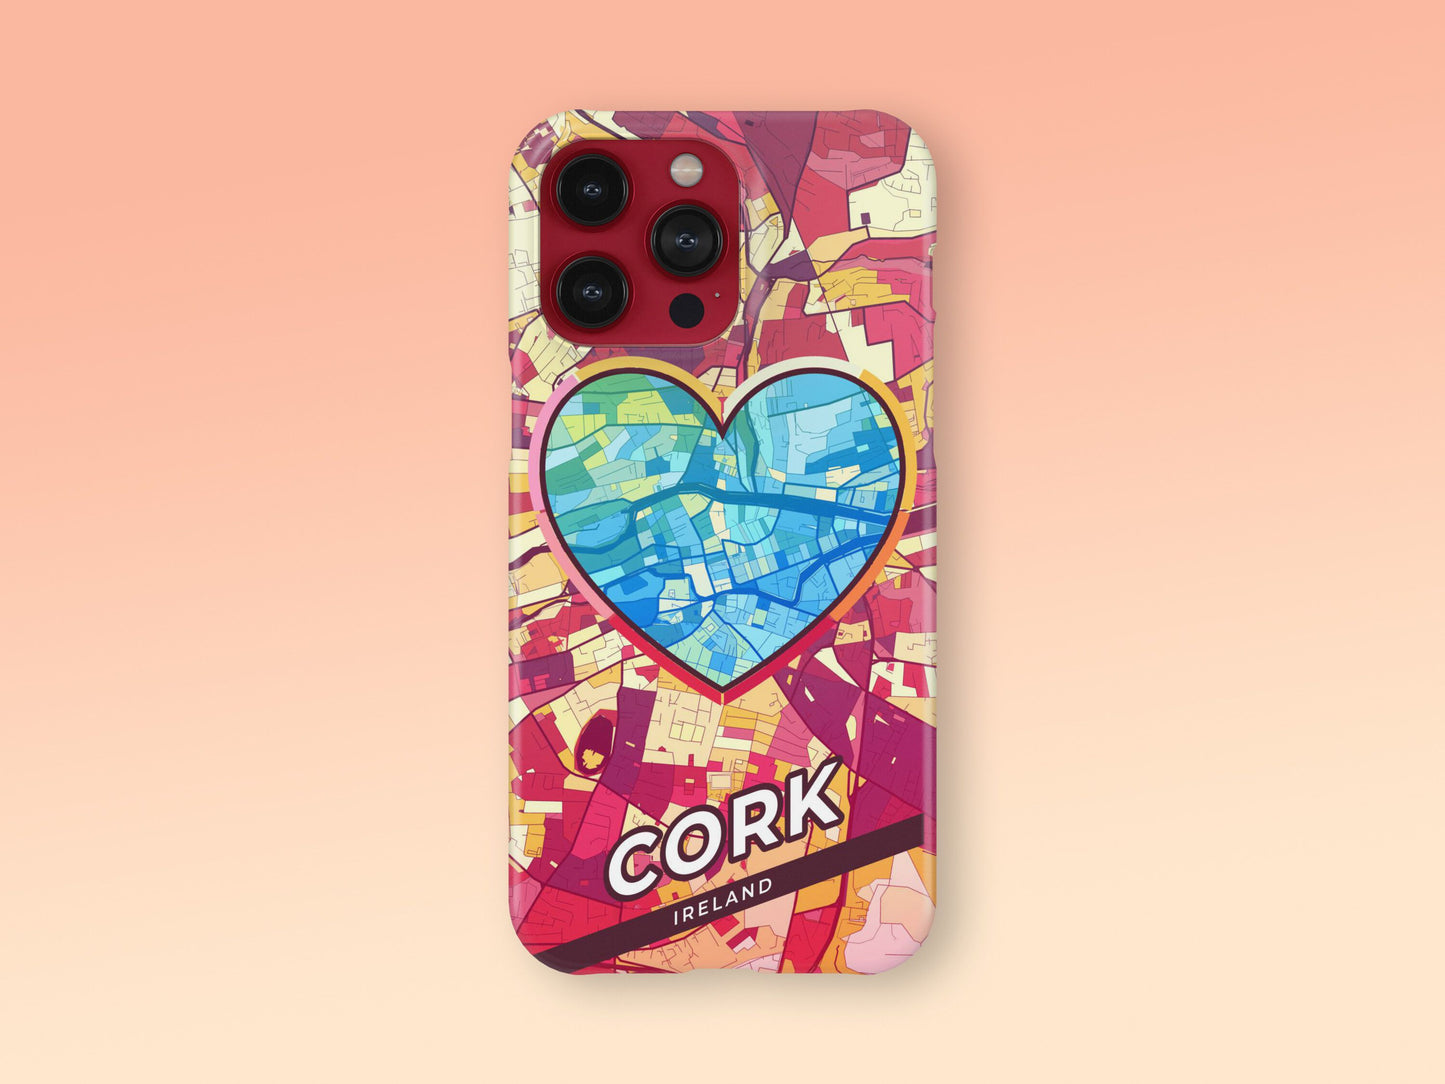 Cork Ireland slim phone case with colorful icon. Birthday, wedding or housewarming gift. Couple match cases. 2